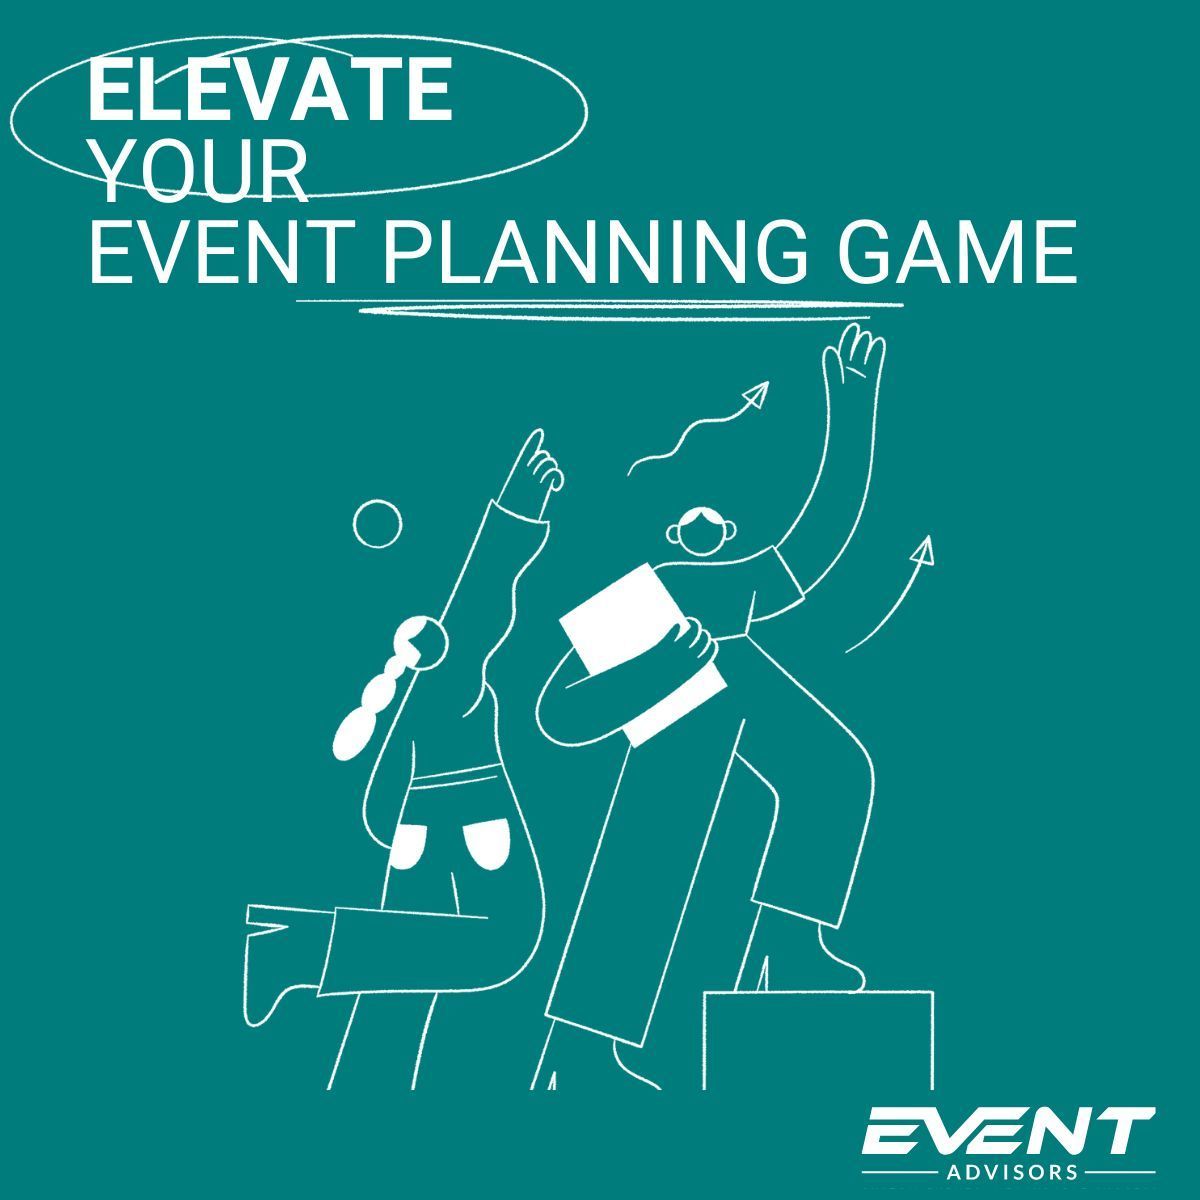 As college basketball teams 📈 their games this week, isn't it time to elevate your event planning game? Event Advisors' Collaborative Coaching program is ready to take your events to new heights. 
#EventSuccess #CoachingProgram #FinServEvents #MarchMadness